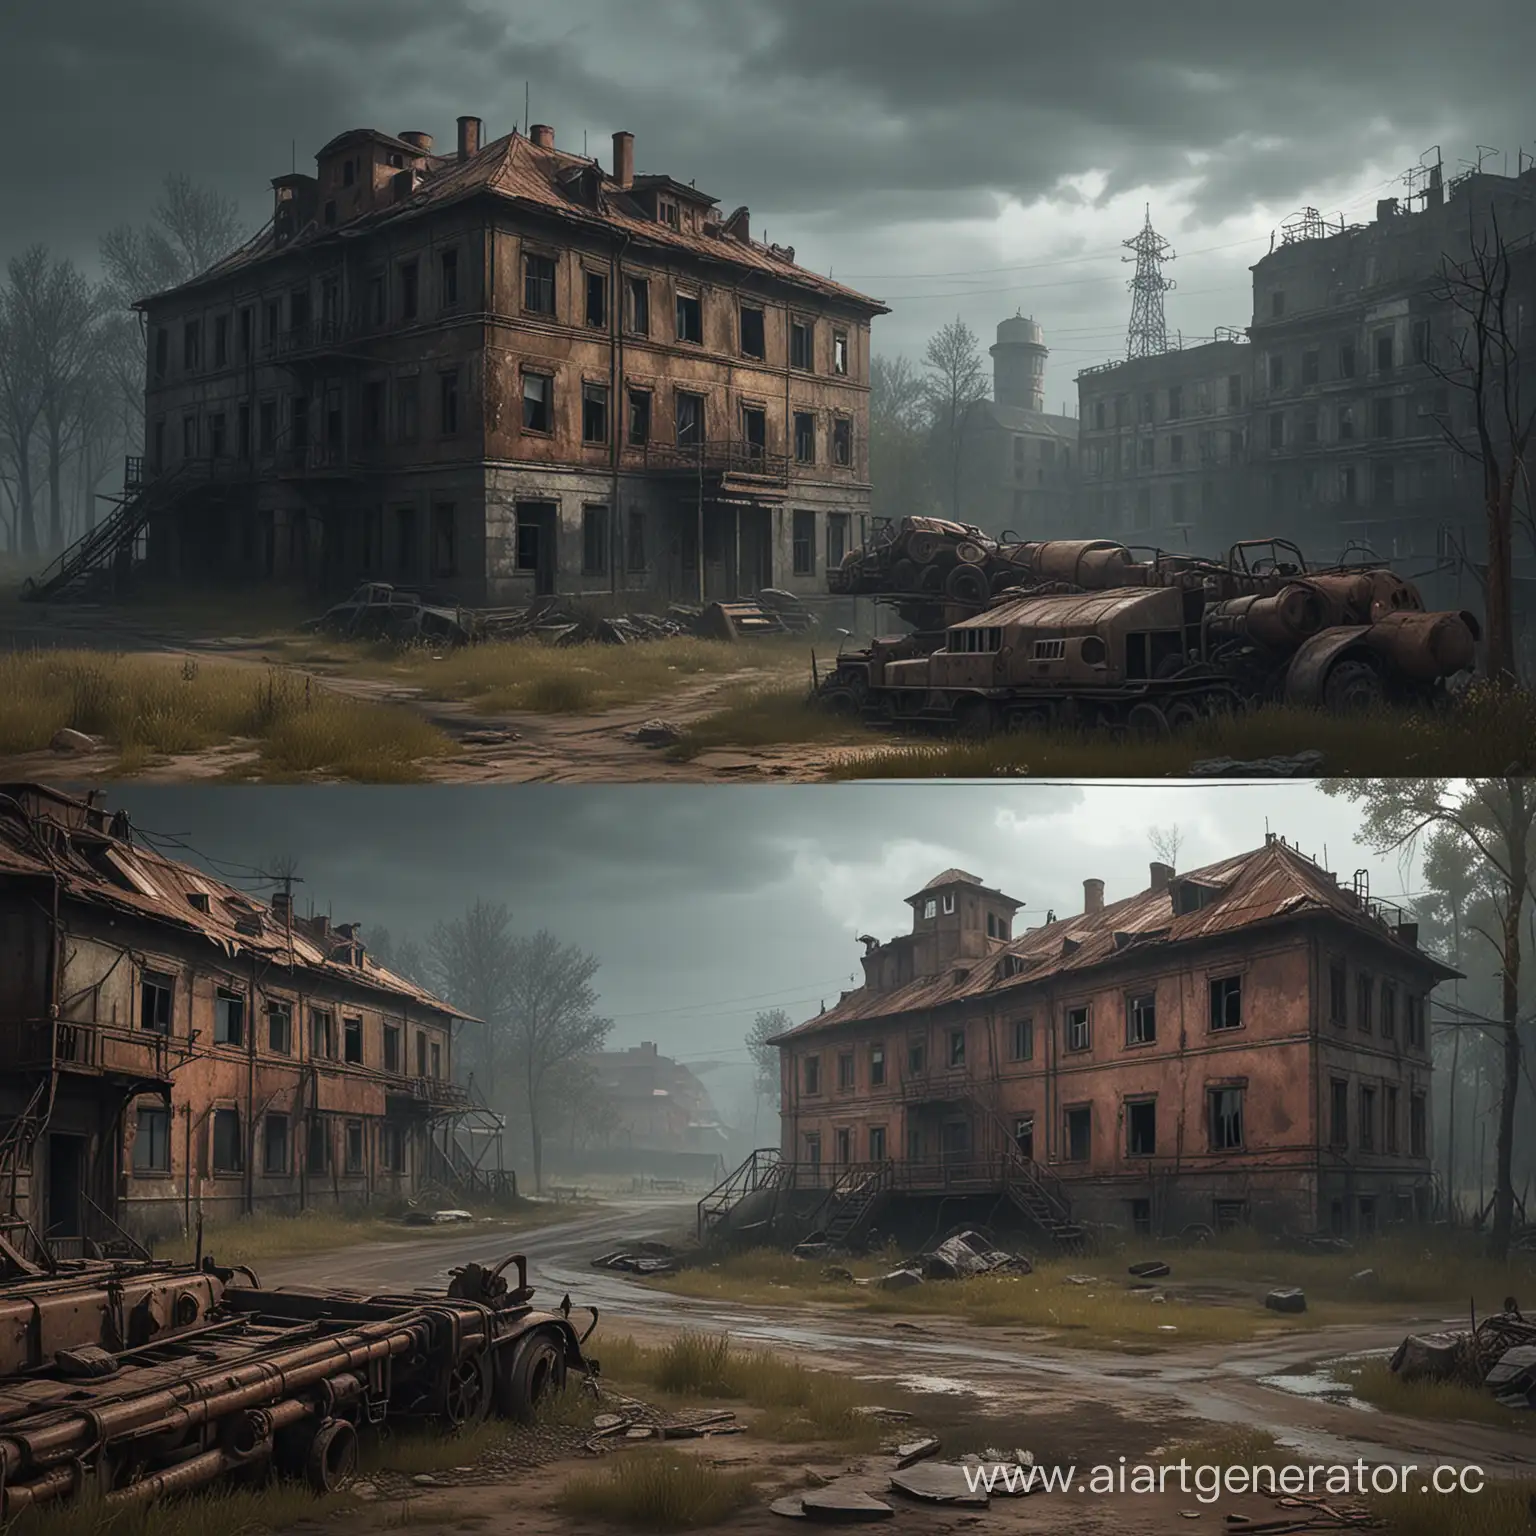 Stylized concept art for stalker2 with realistic daylighting, old buildings from the Soviet era, rusty machinery, dangerous and mysterious locations, terrible monsters, mostly in dark gloomy colors